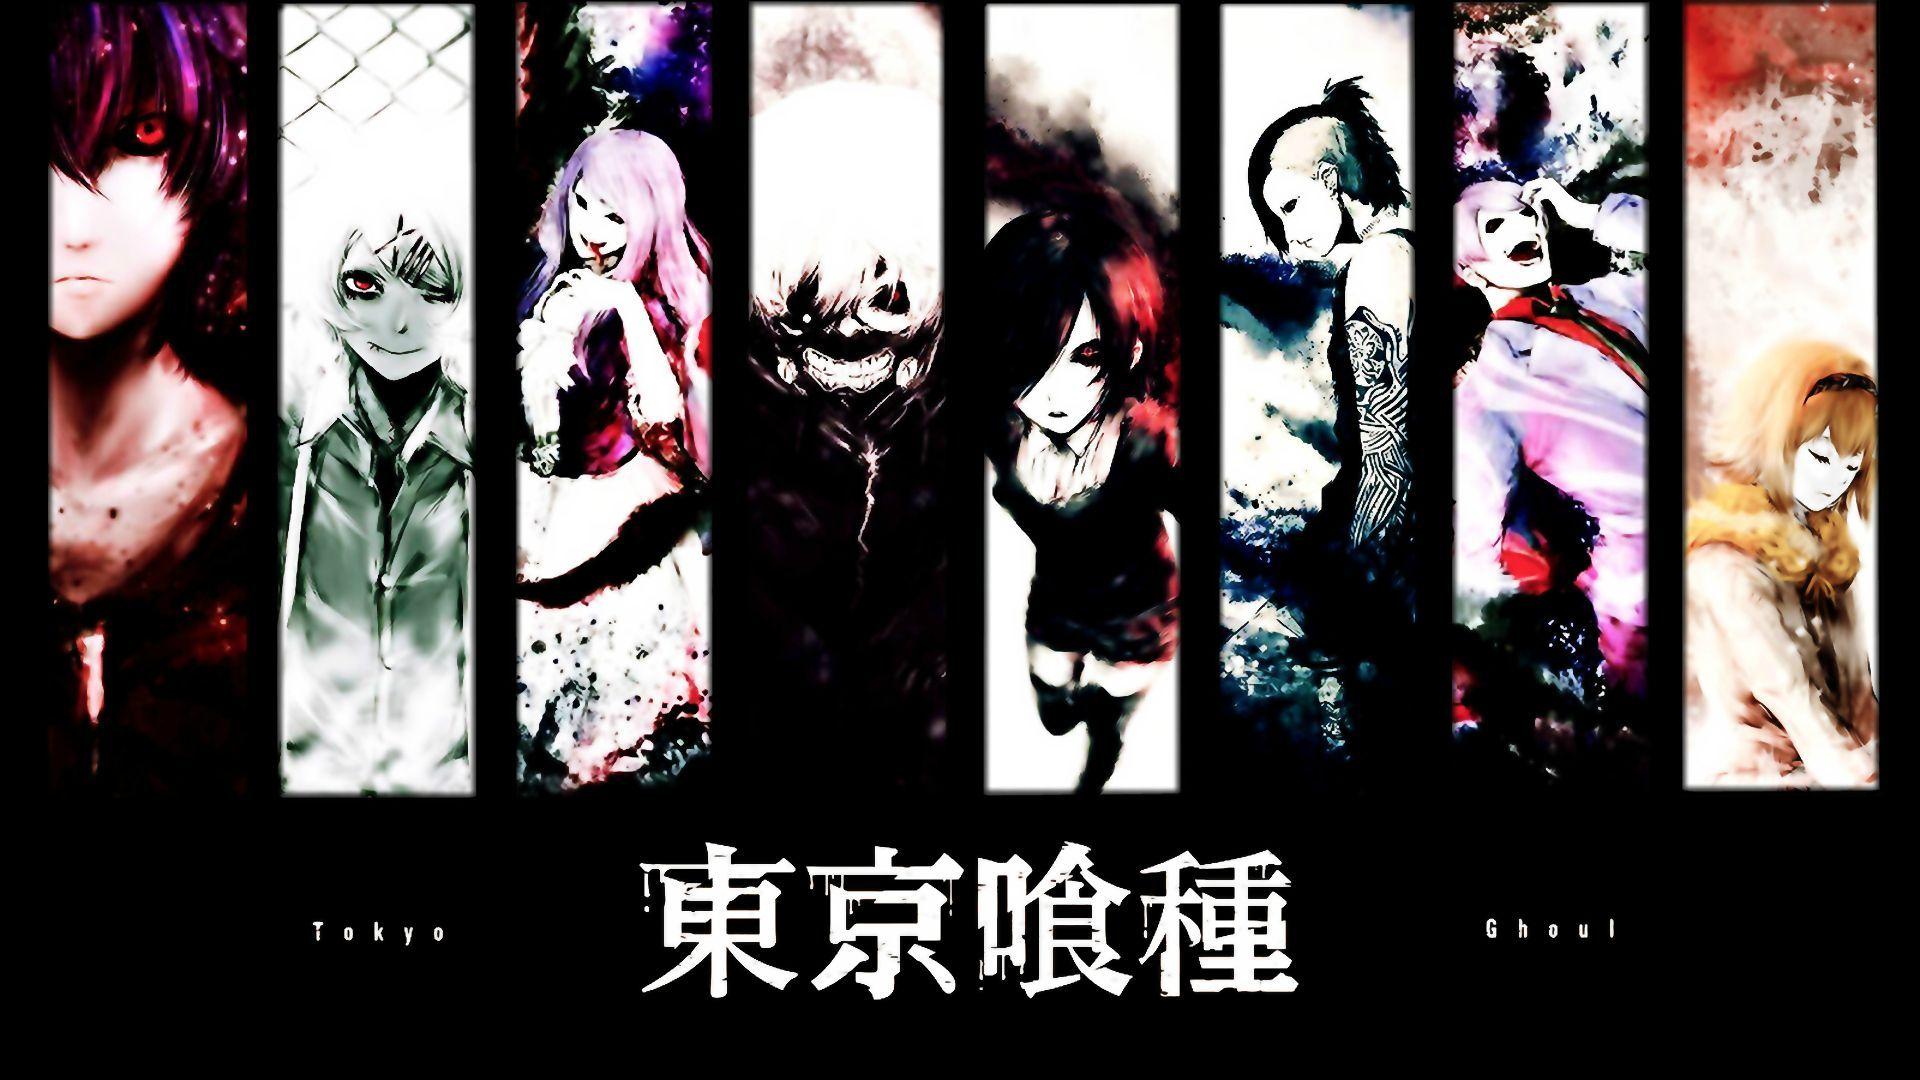 Tokyo Ghoul Season 3 Speculation & Release Date